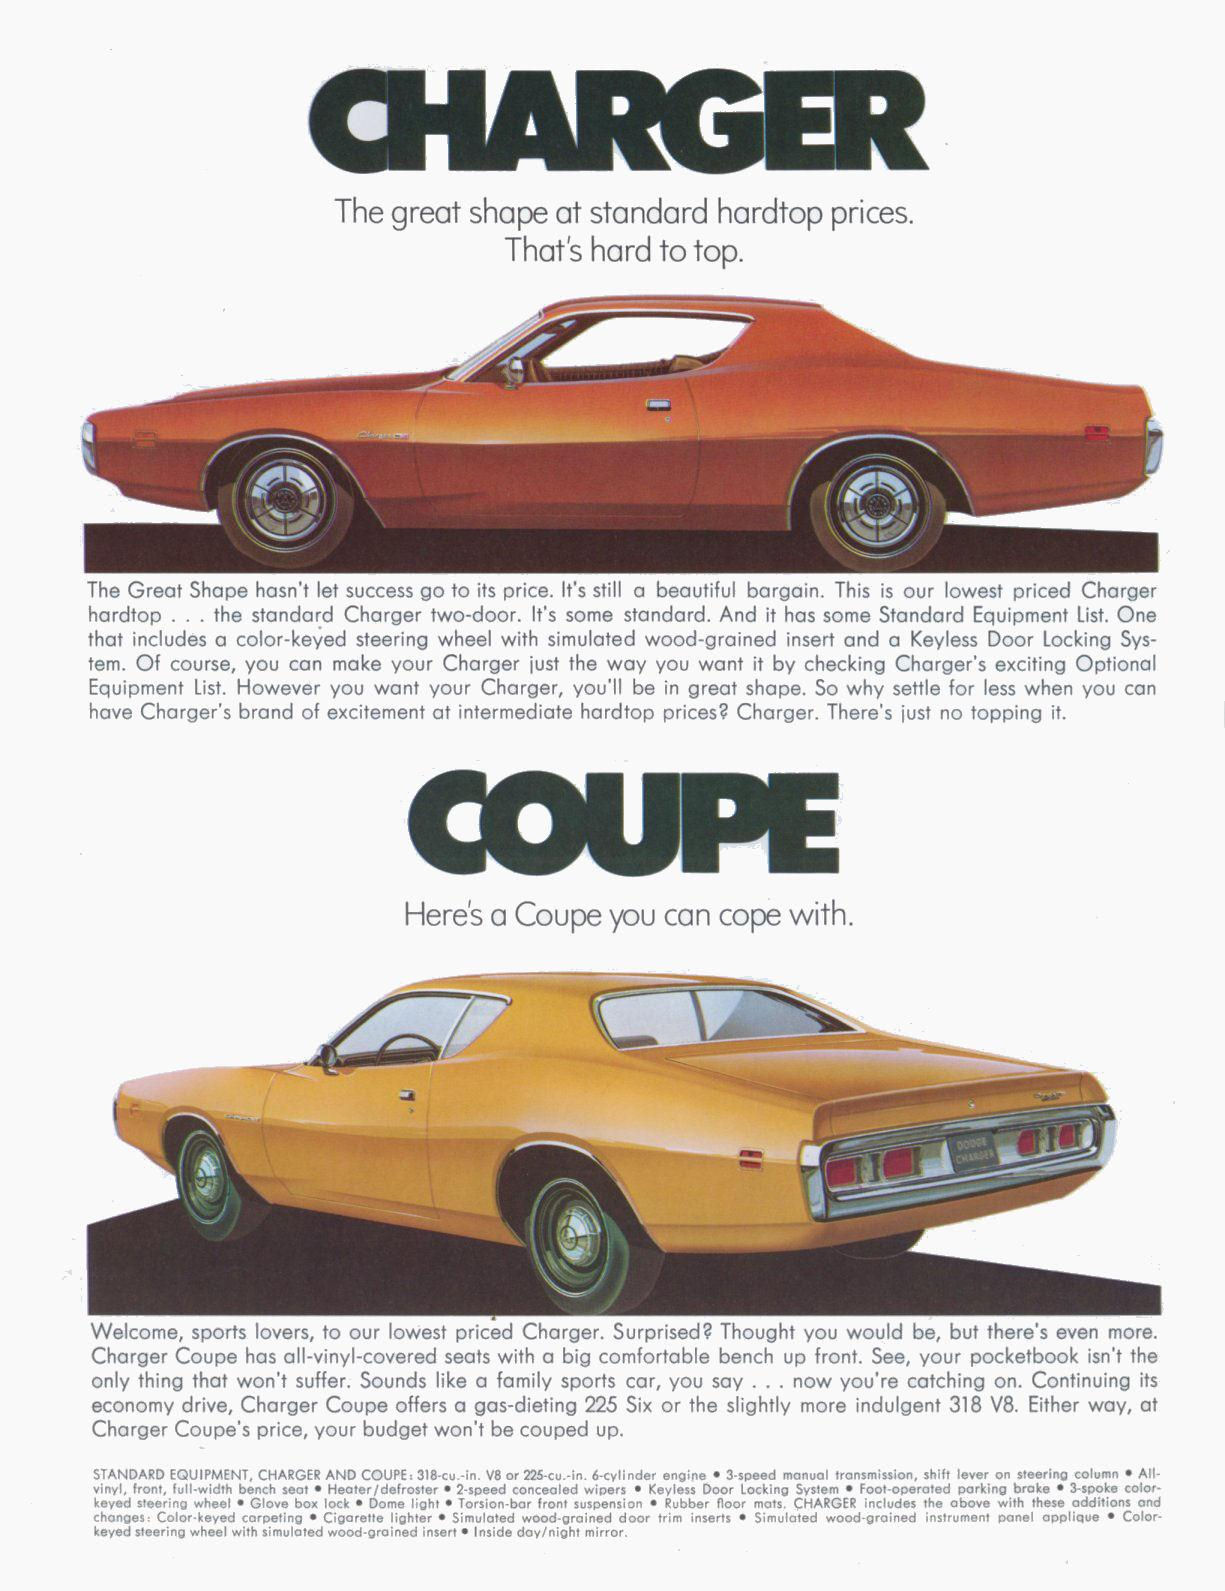 1971 Dodge Charger-Coronet Brochure Page 1